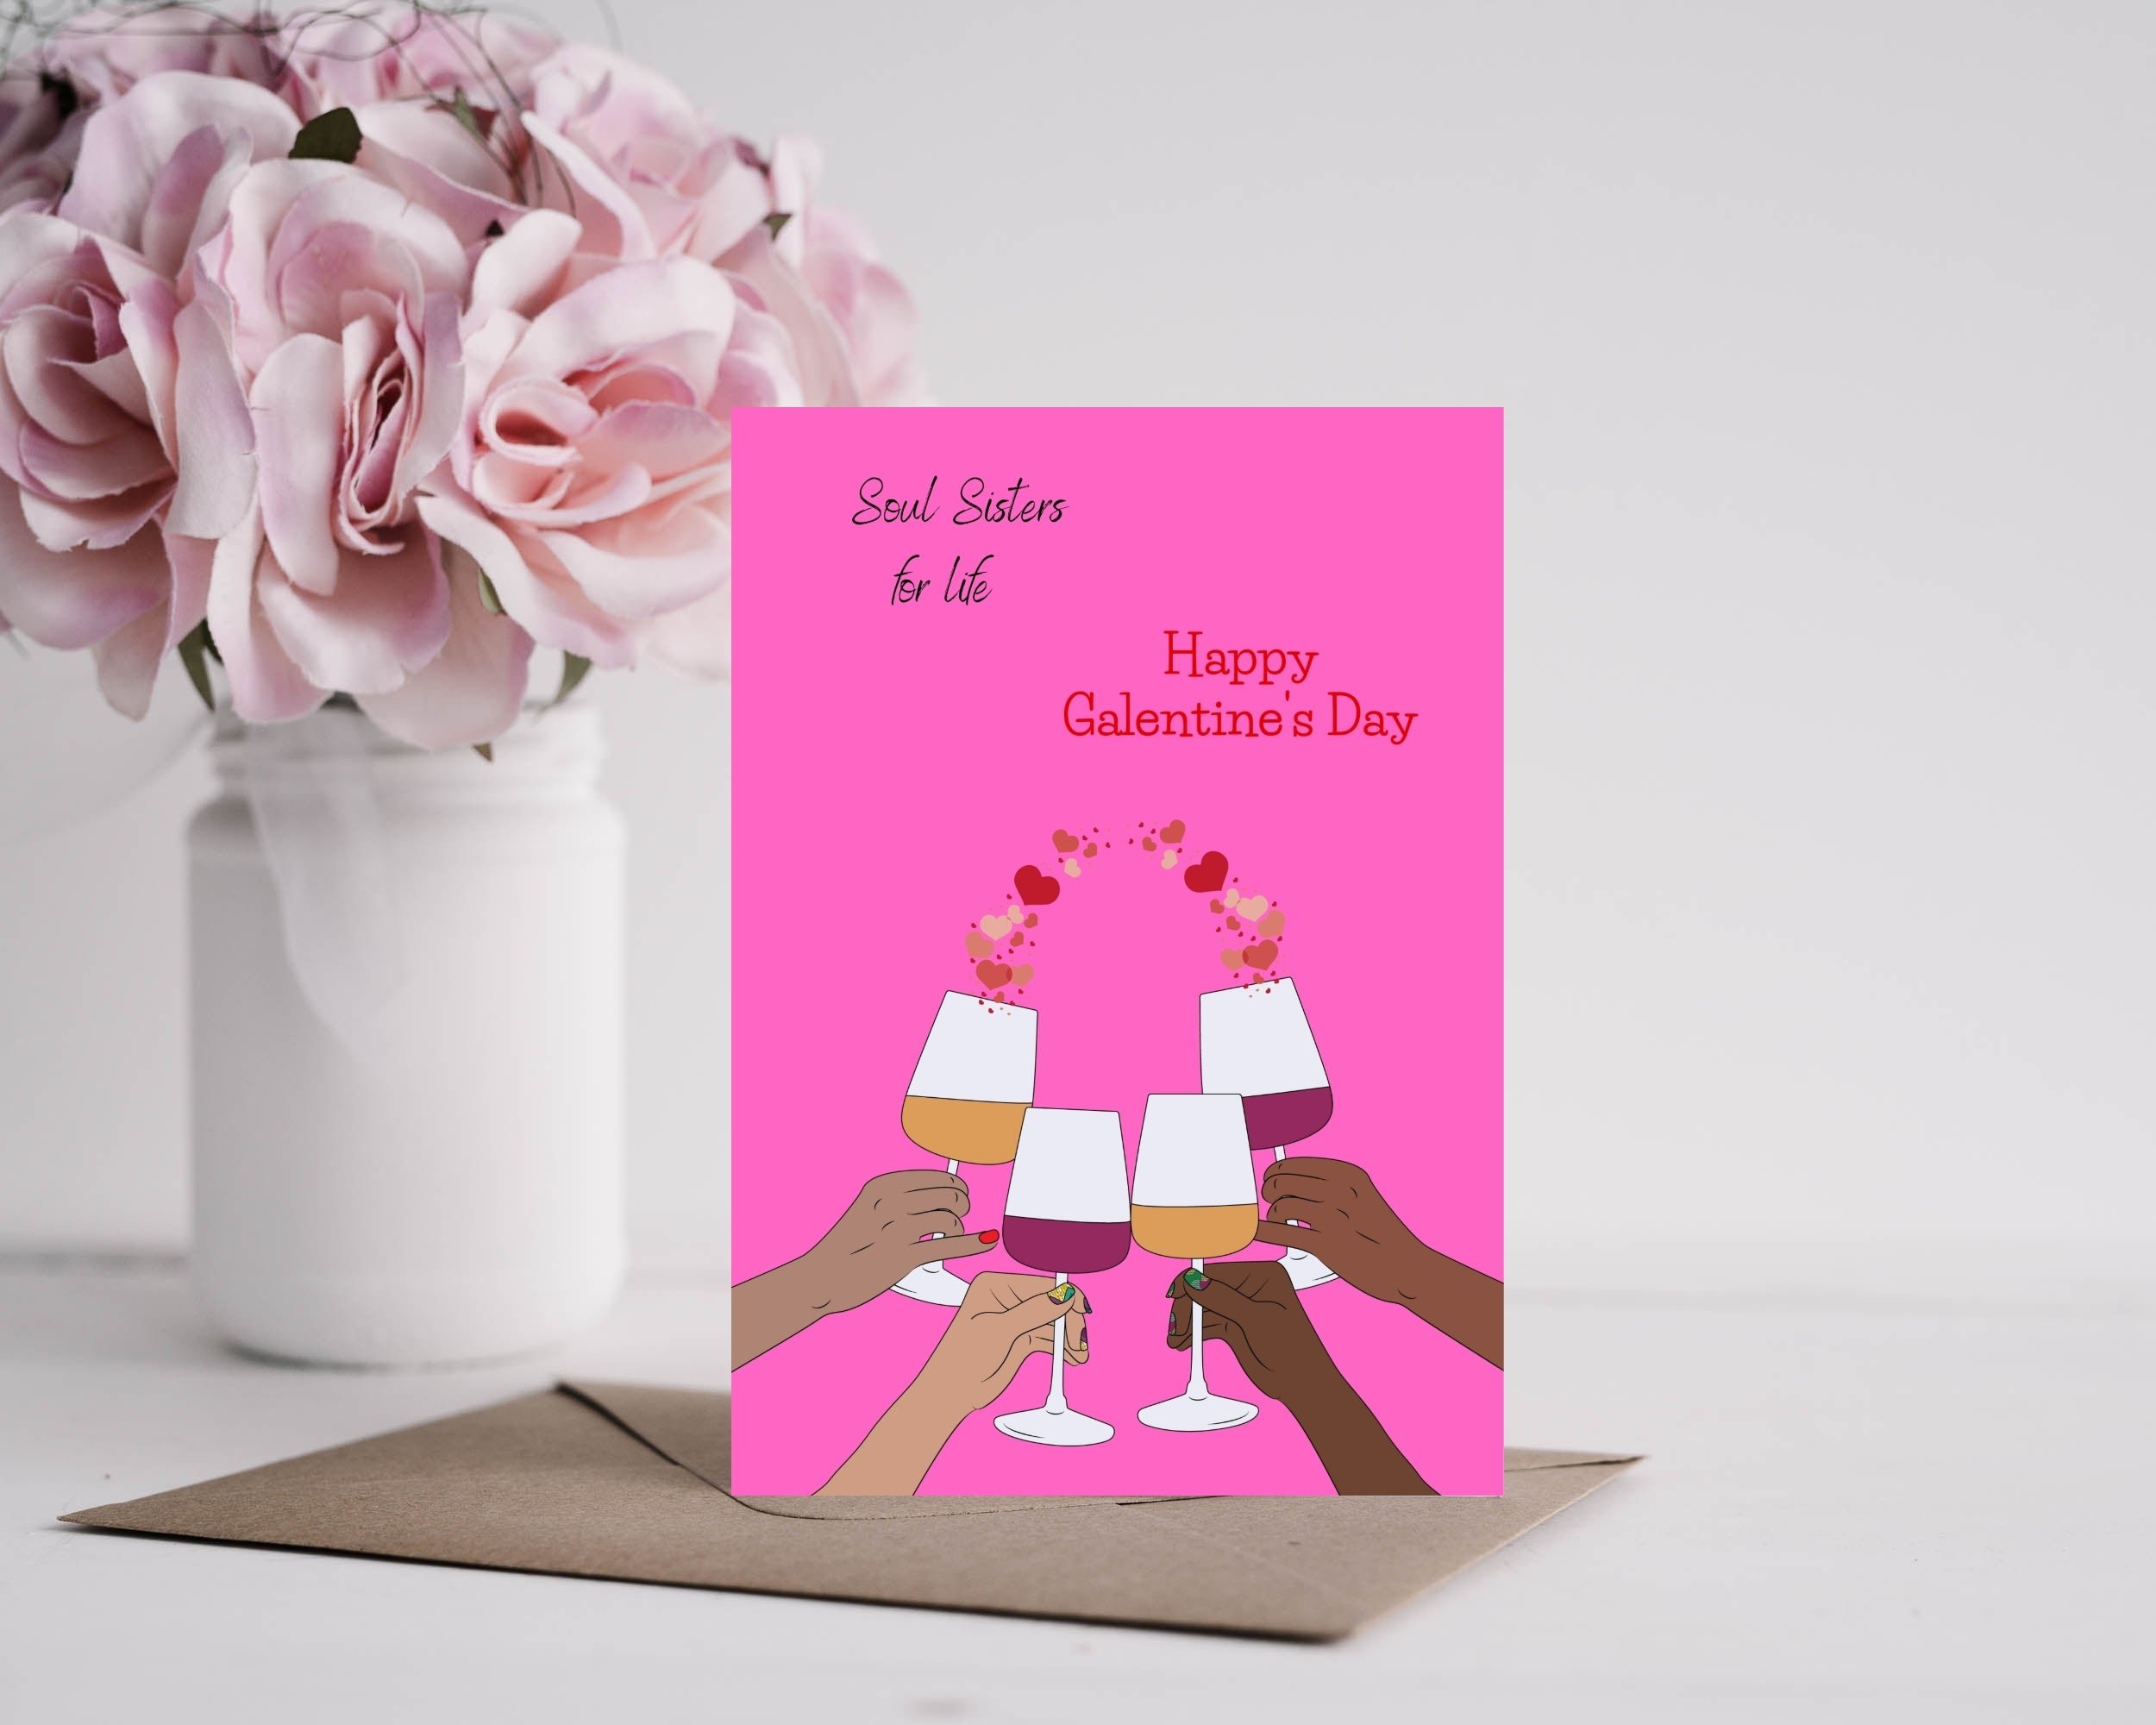 Galentines Day Black Friends Soul Sisters Friendships Valentines Card